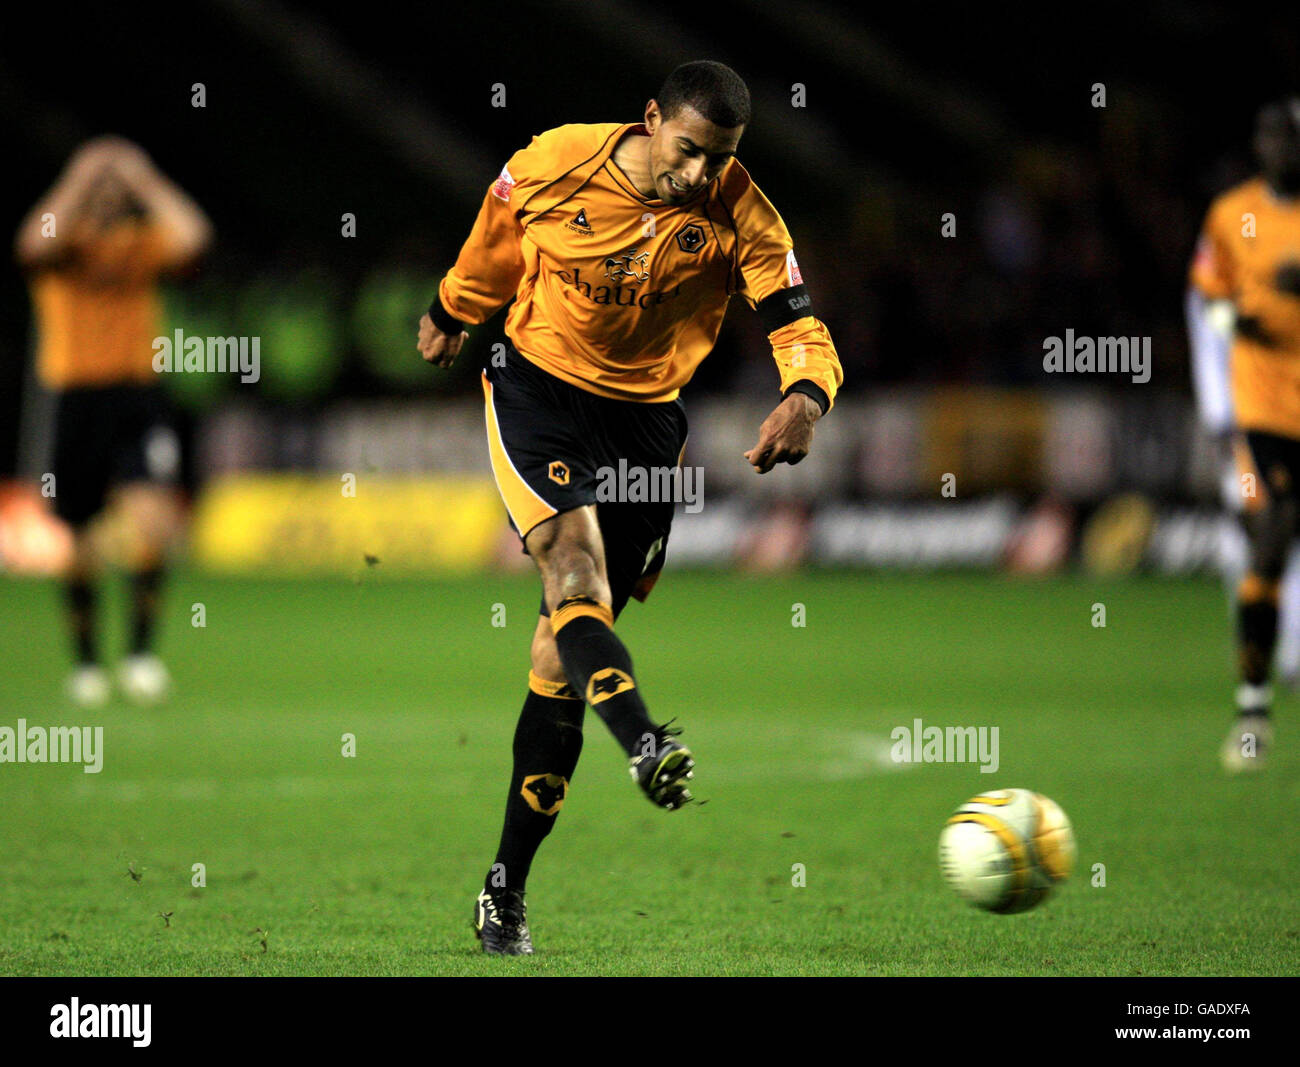 Wolverhampton Wanderers player Karl Henry scores the opening goal of the game during the Coca-Cola Football League Championship match at Molineux, Wolverhampton. Stock Photo